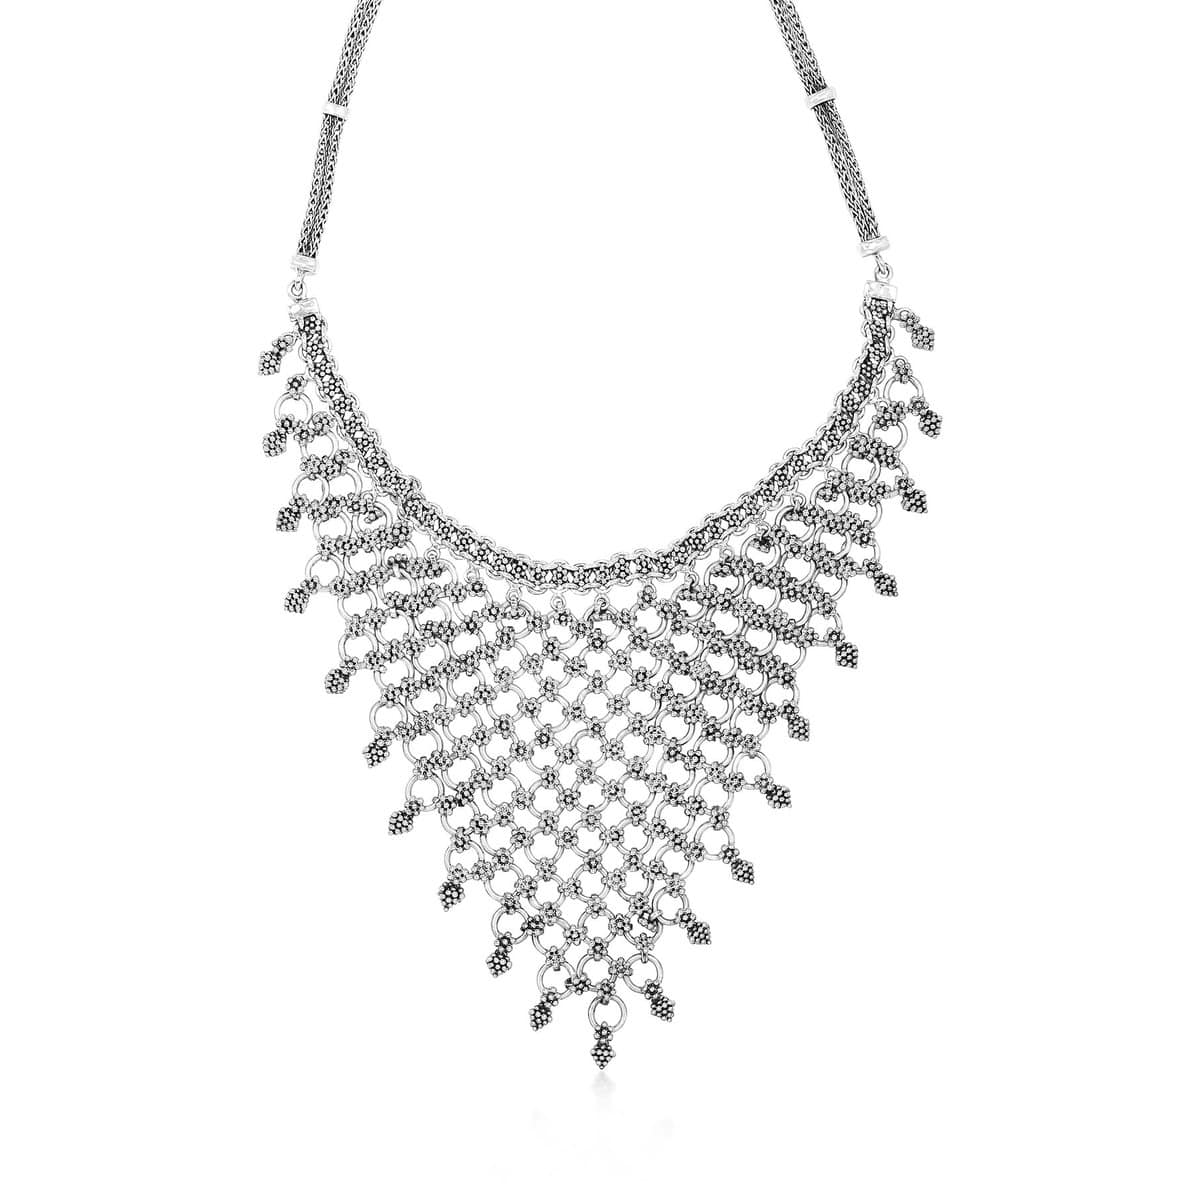 Sterling Silver Classic Granulated Bib Necklace - NP8155-15448 - Lois Hill